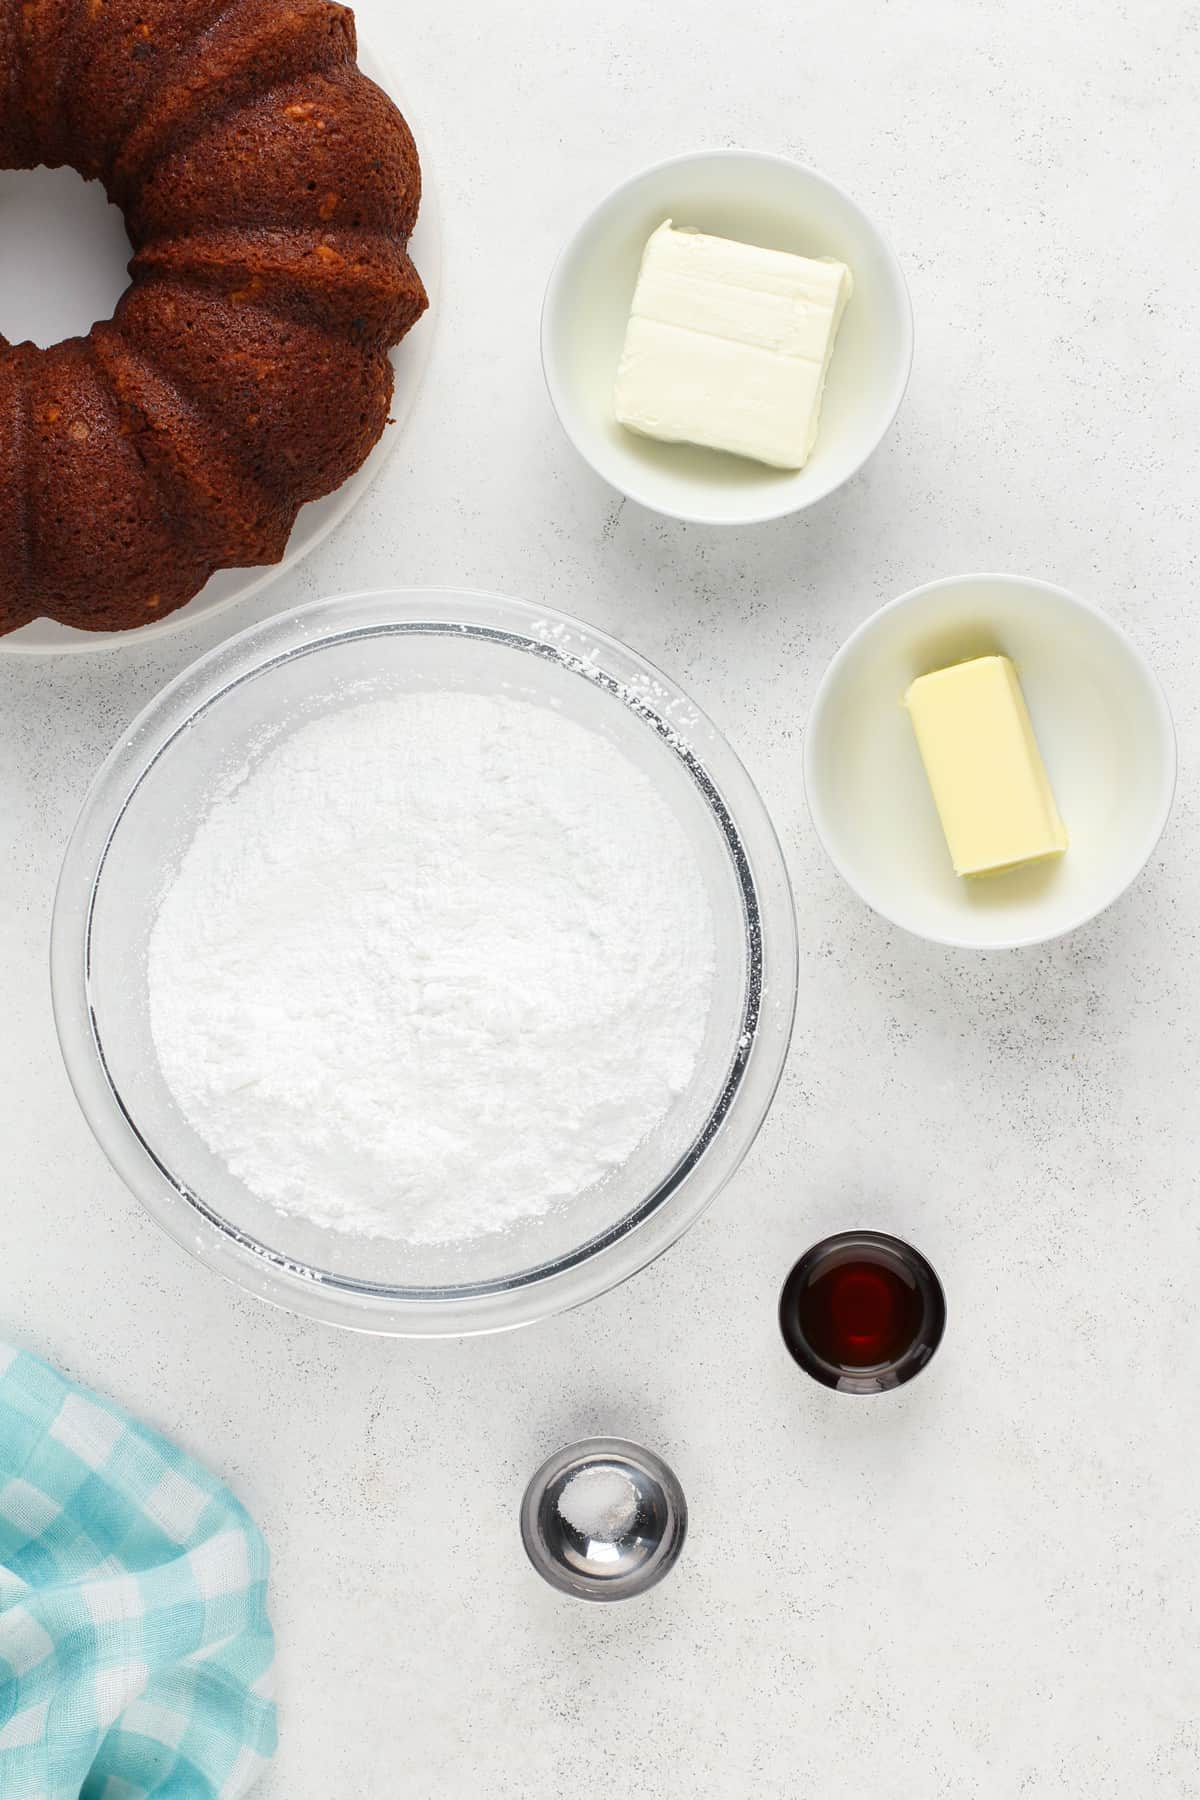 Ingredients for cream cheese frosting next to a bundt cake on a countertop.